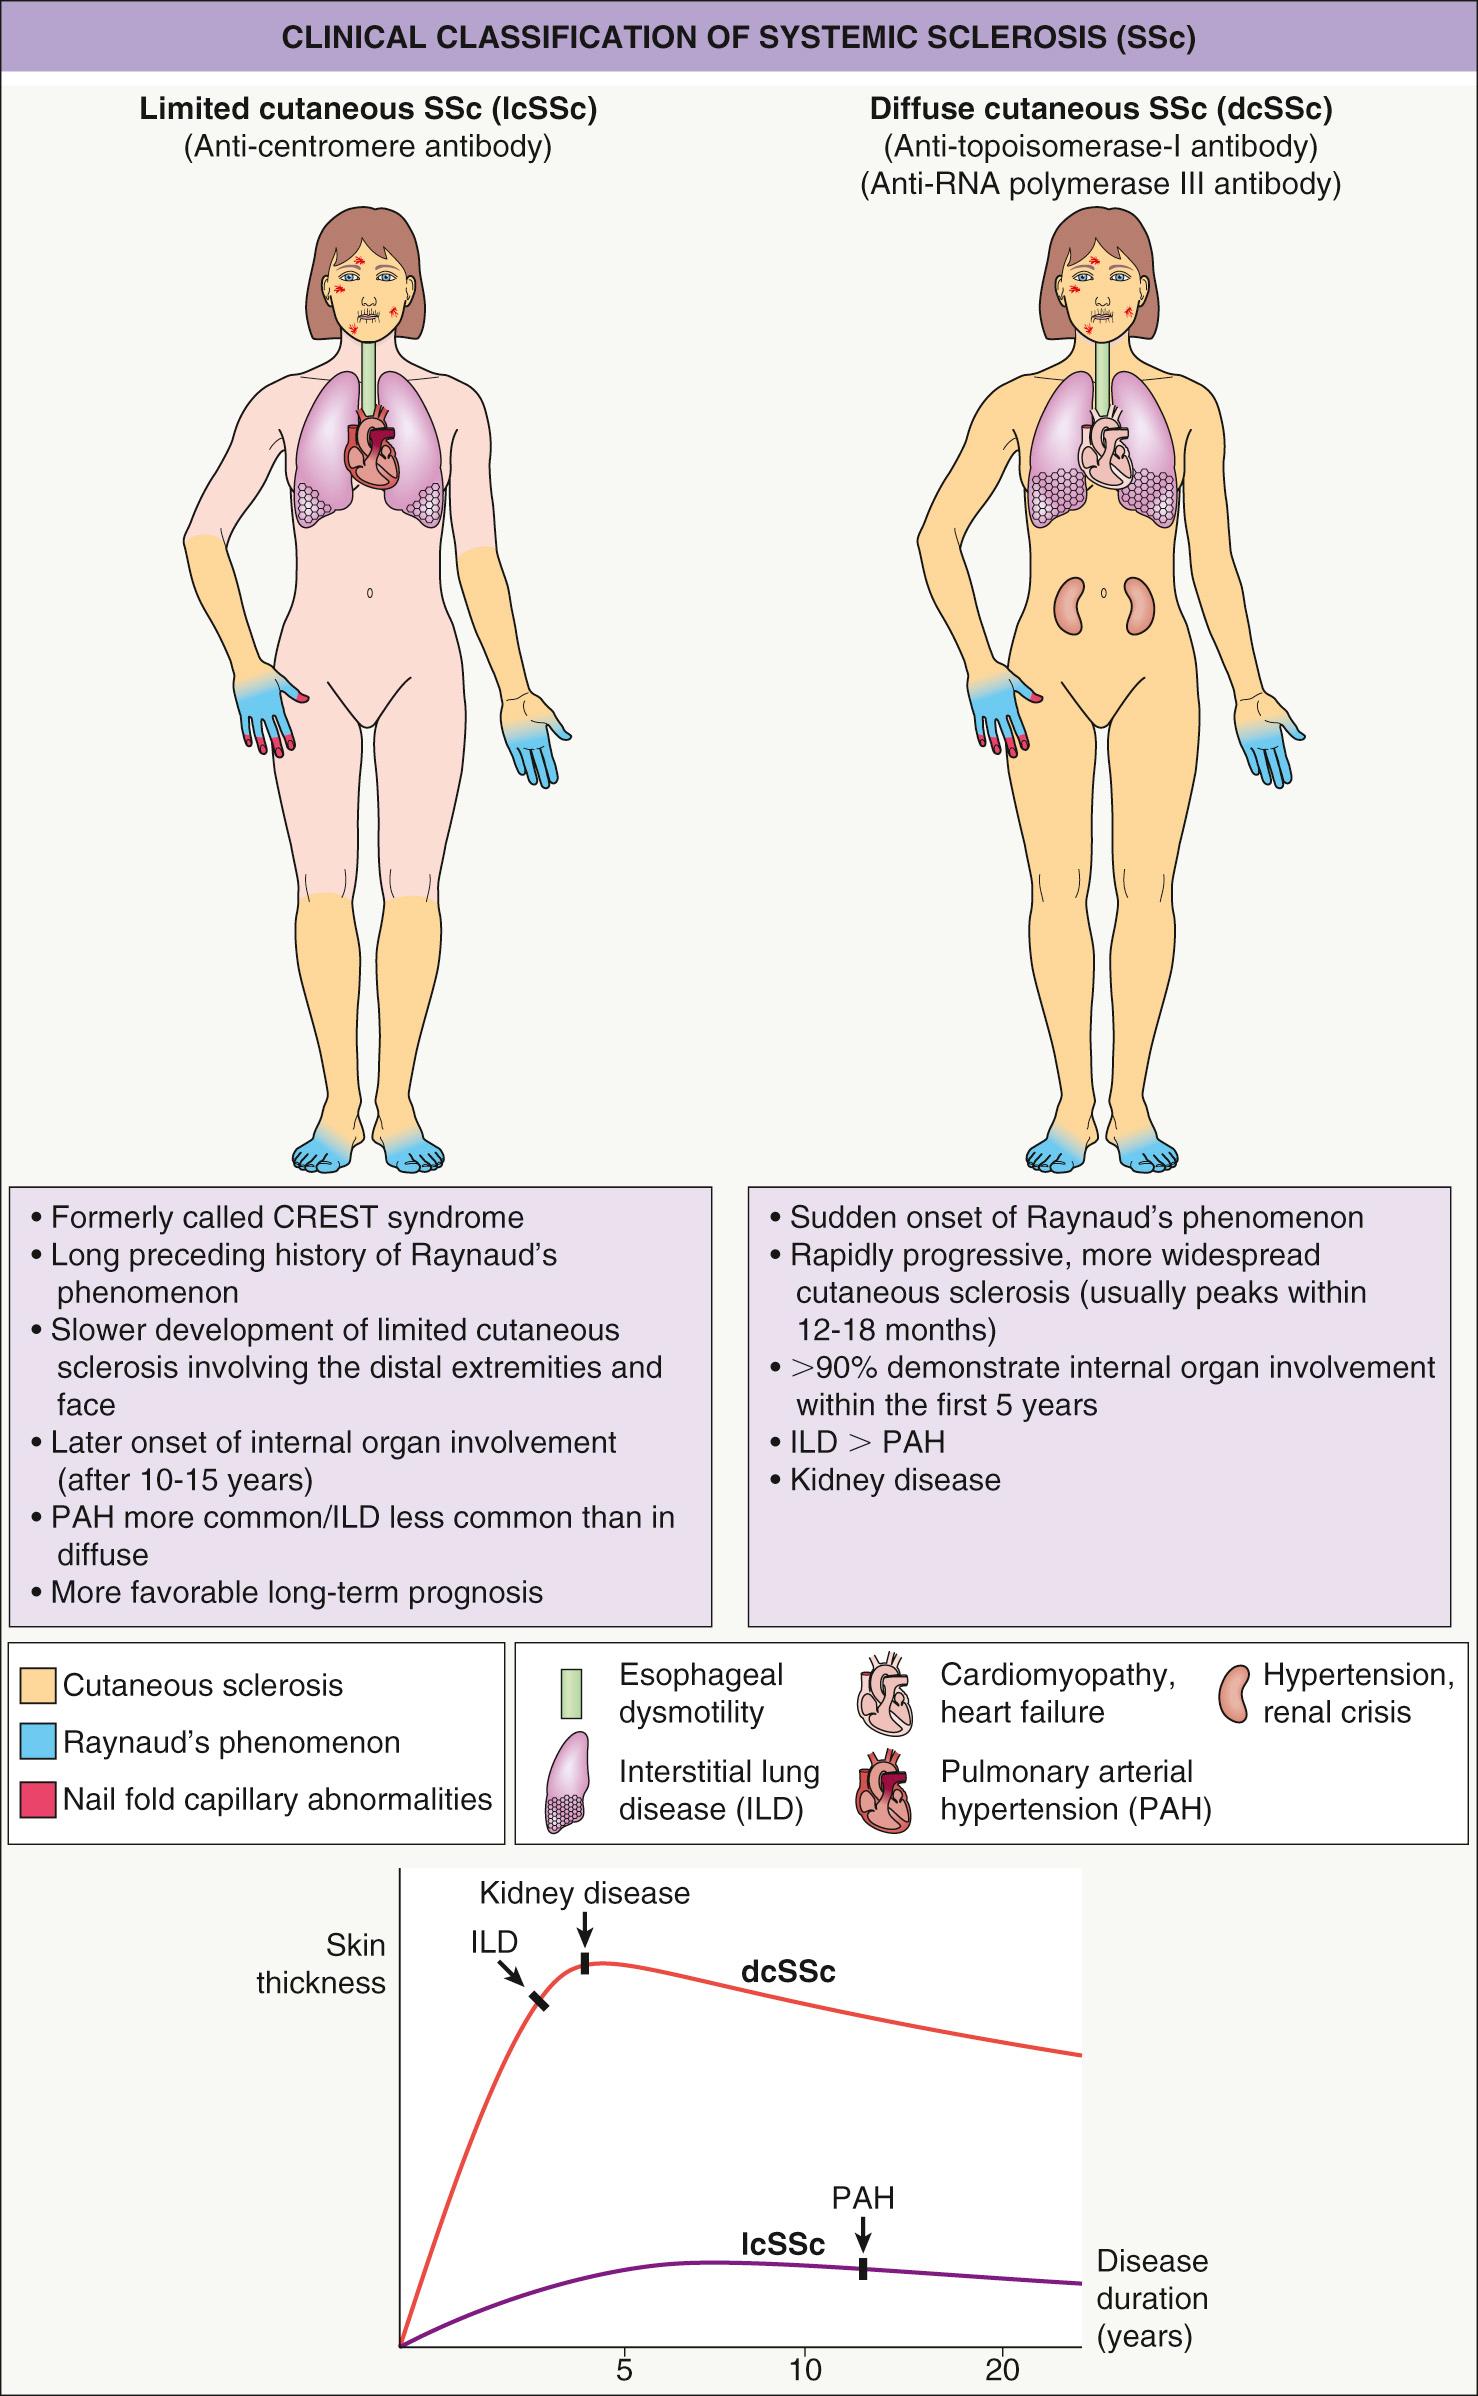 Fig. 43.2, Clinical classification of systemic sclerosis (SSc).